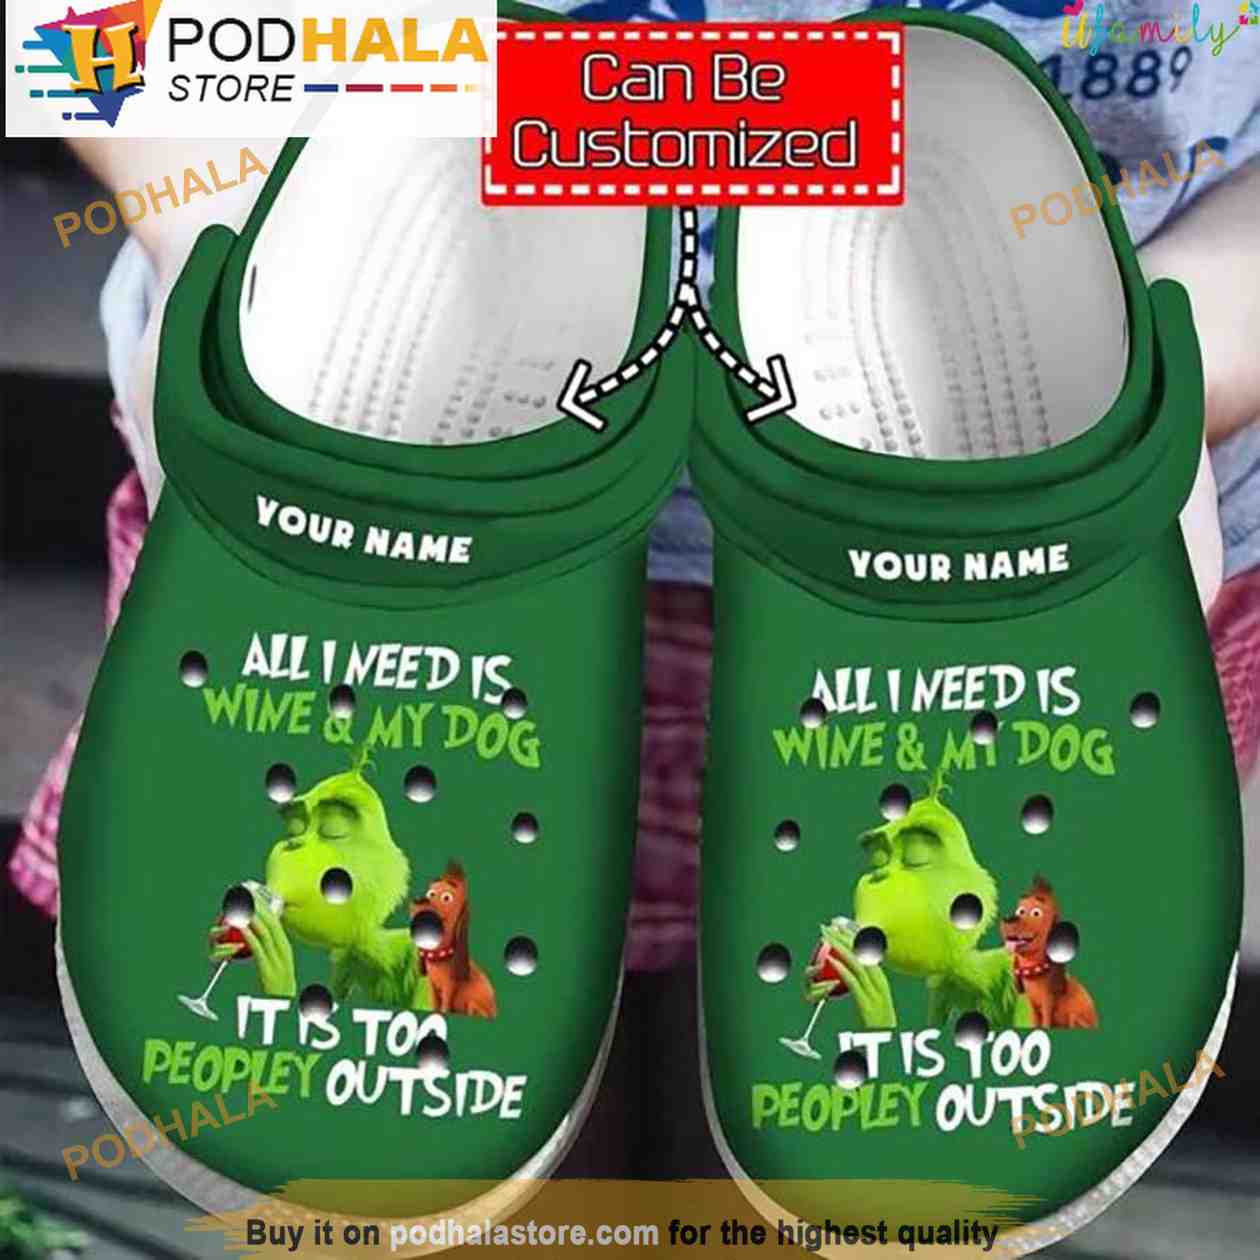 Amazing Shrek Floral 3D Crocs Shoes, Funny Crocs - Bring Your Ideas,  Thoughts And Imaginations Into Reality Today